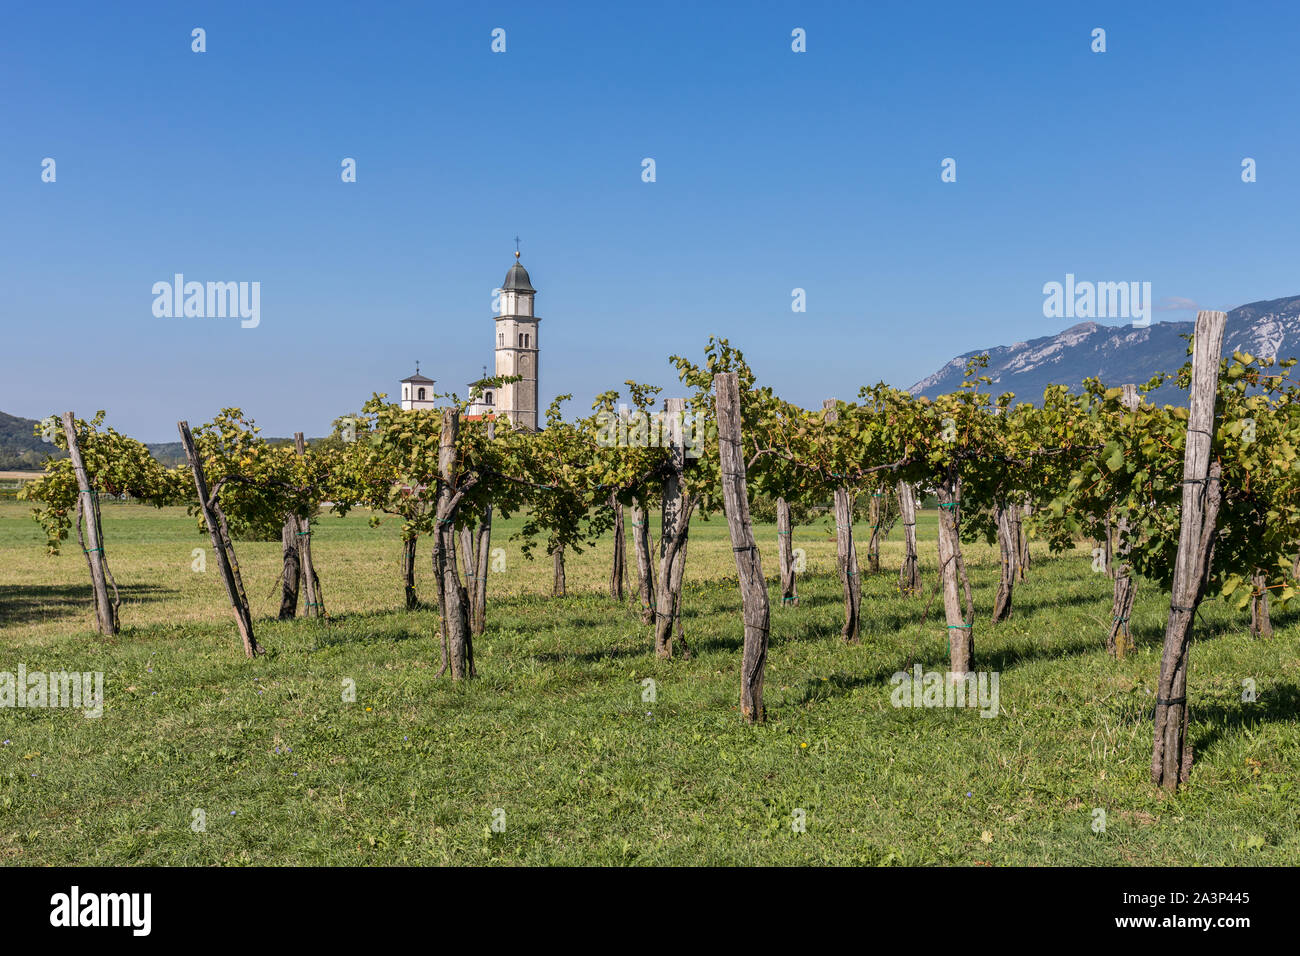 Vineyards and the pilgrimage Church of Our Lady of Consolation in Log pri Vipavi, Vipava Valley, Slovenia Stock Photo